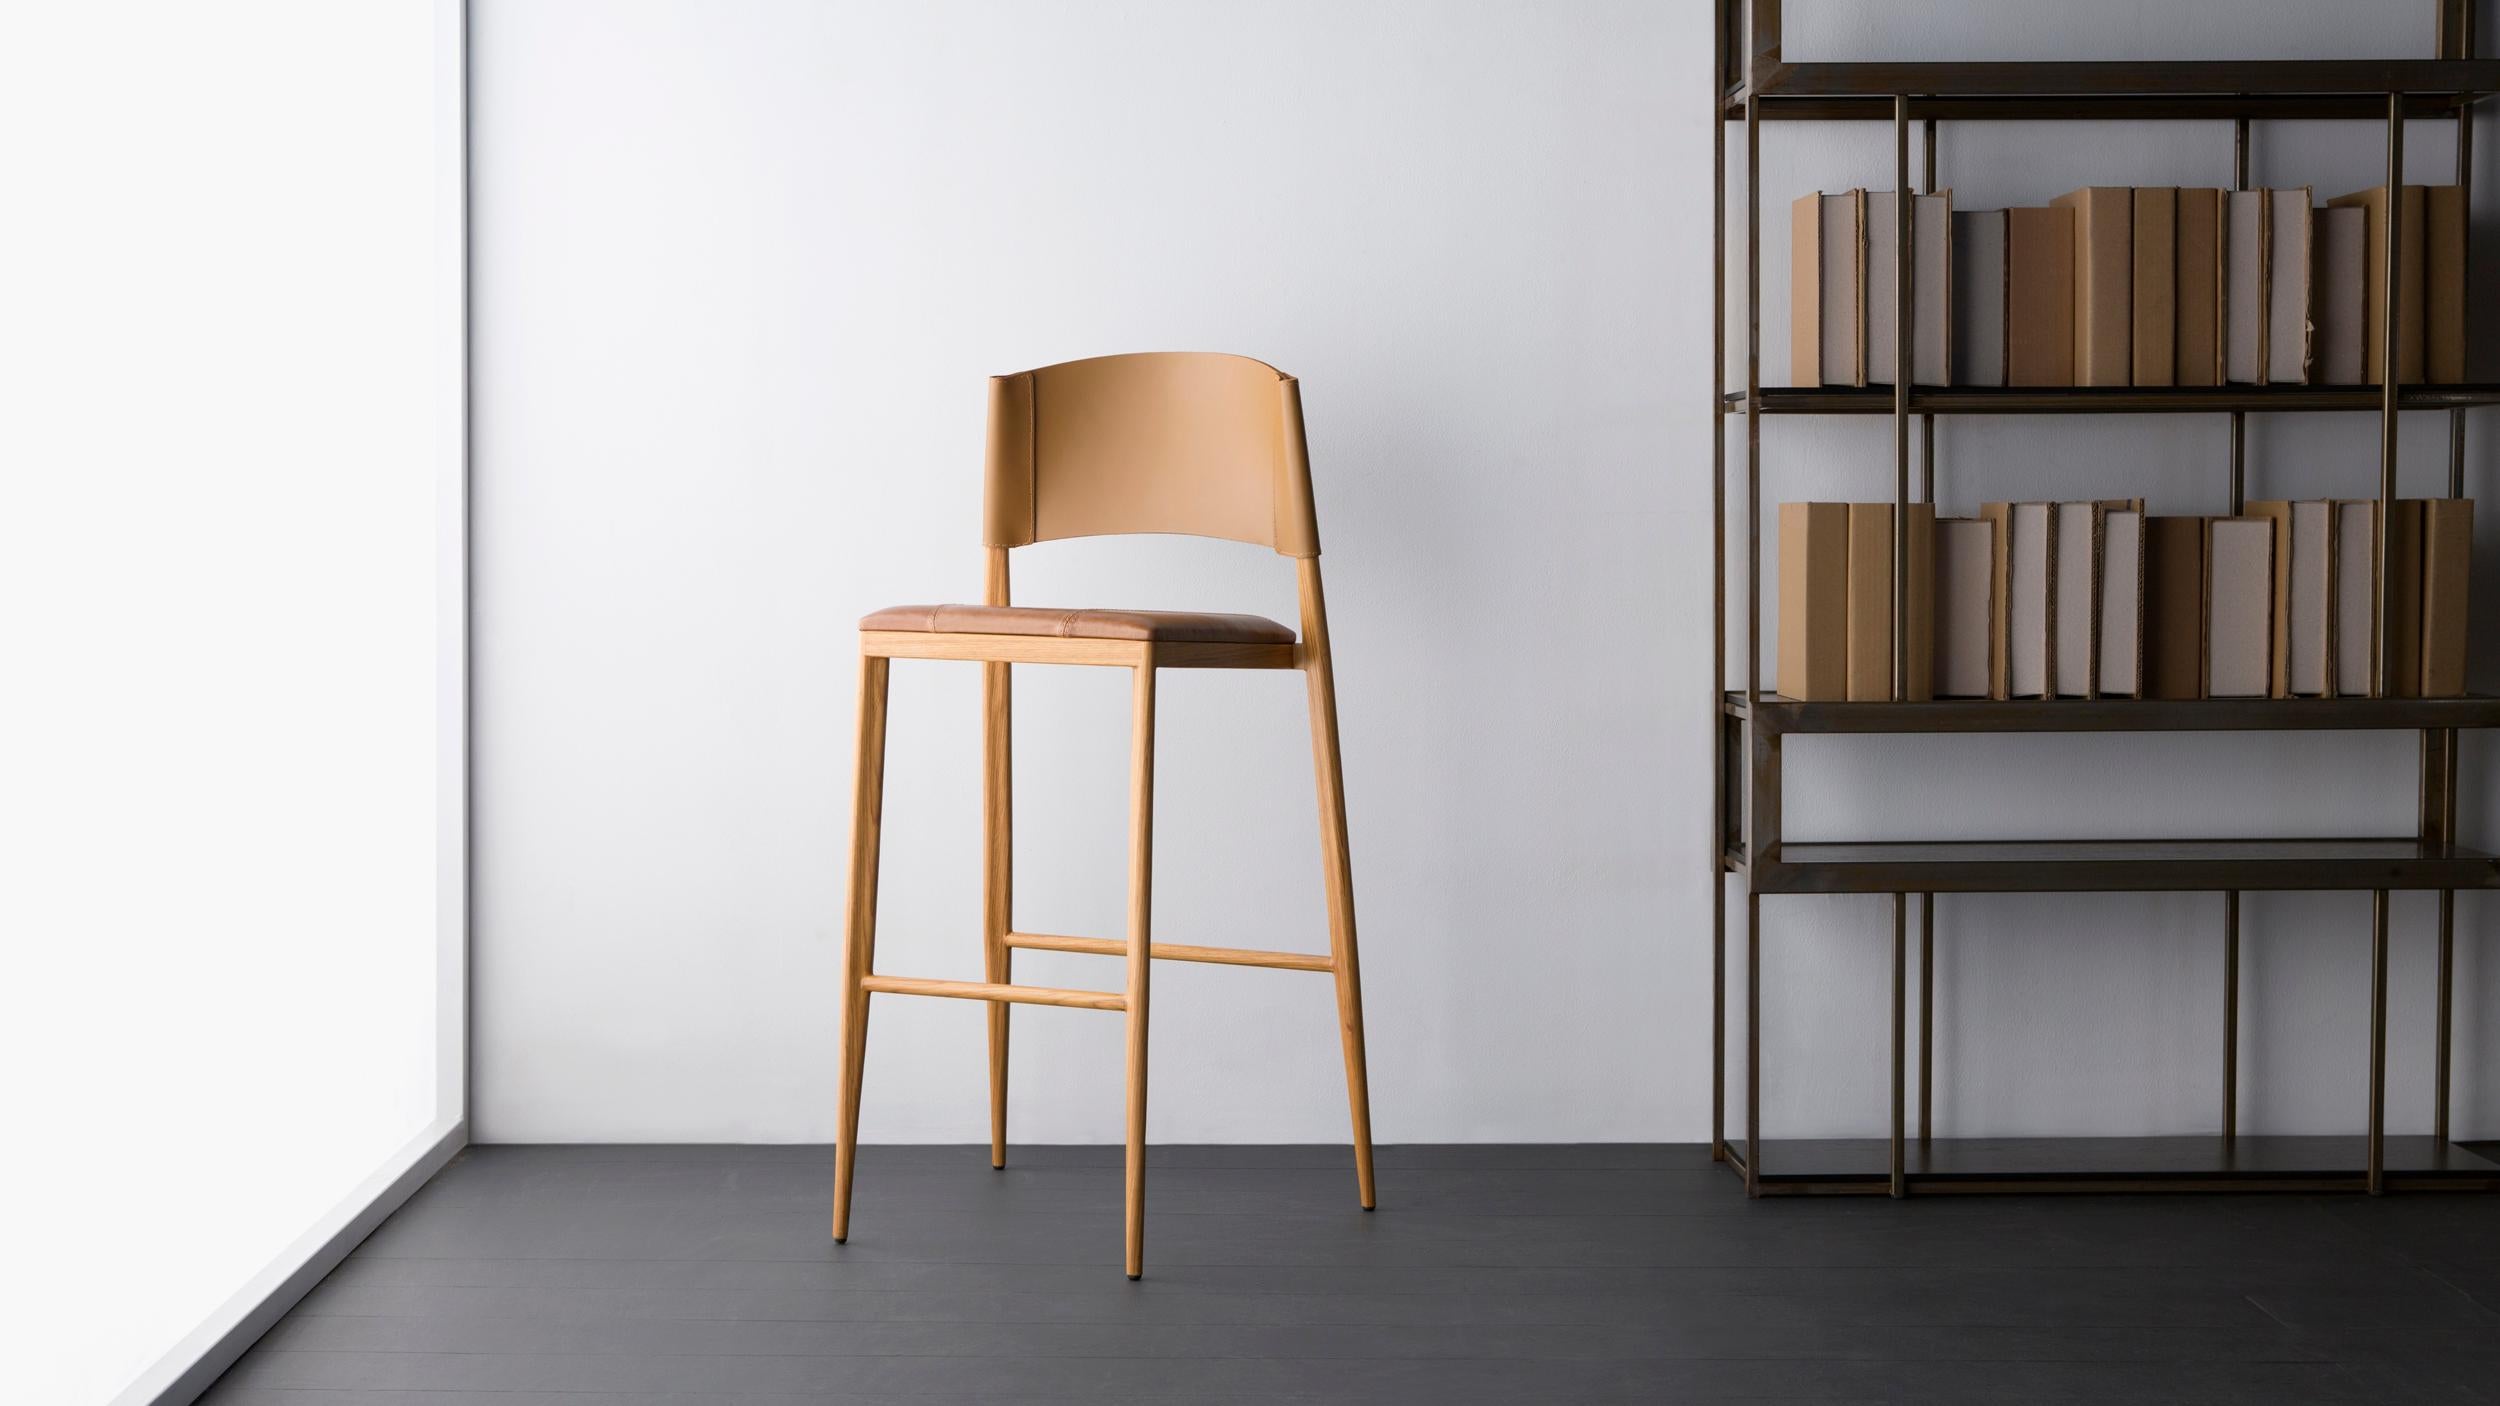 High Ale Bar Stool by Doimo Brasil
Dimensions: W 55 x D 54 x H 107 cm 
Materials: Veneer, Leather, Soleta.


With the intention of providing good taste and personality, Doimo deciphers trends and follows the evolution of man and his space. To this